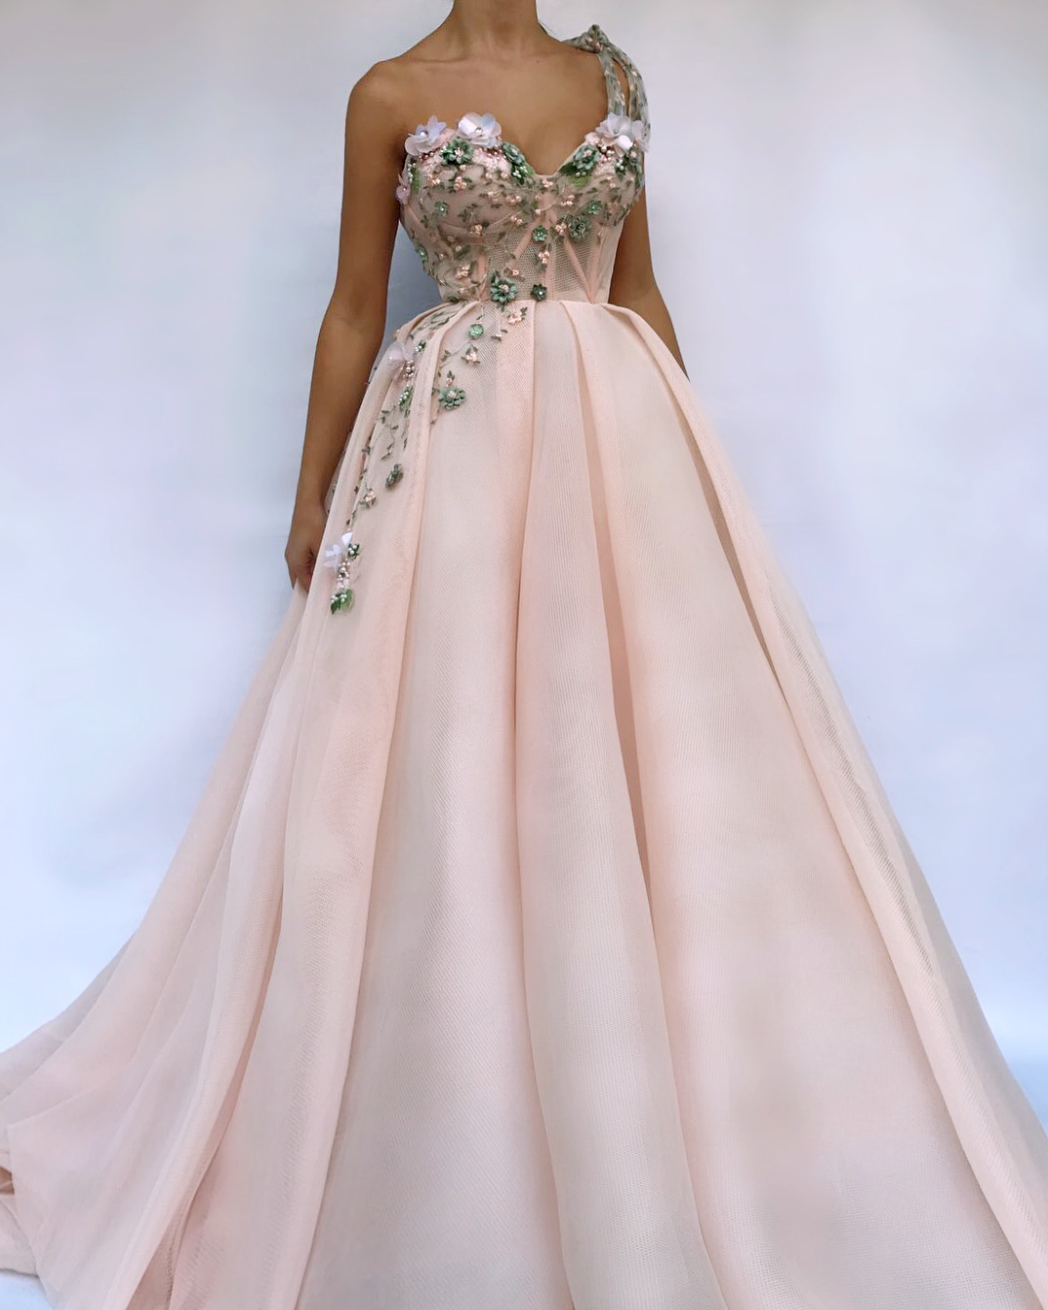 Buy Pink Dresses & Gowns for Women by FEMVY Online | Ajio.com